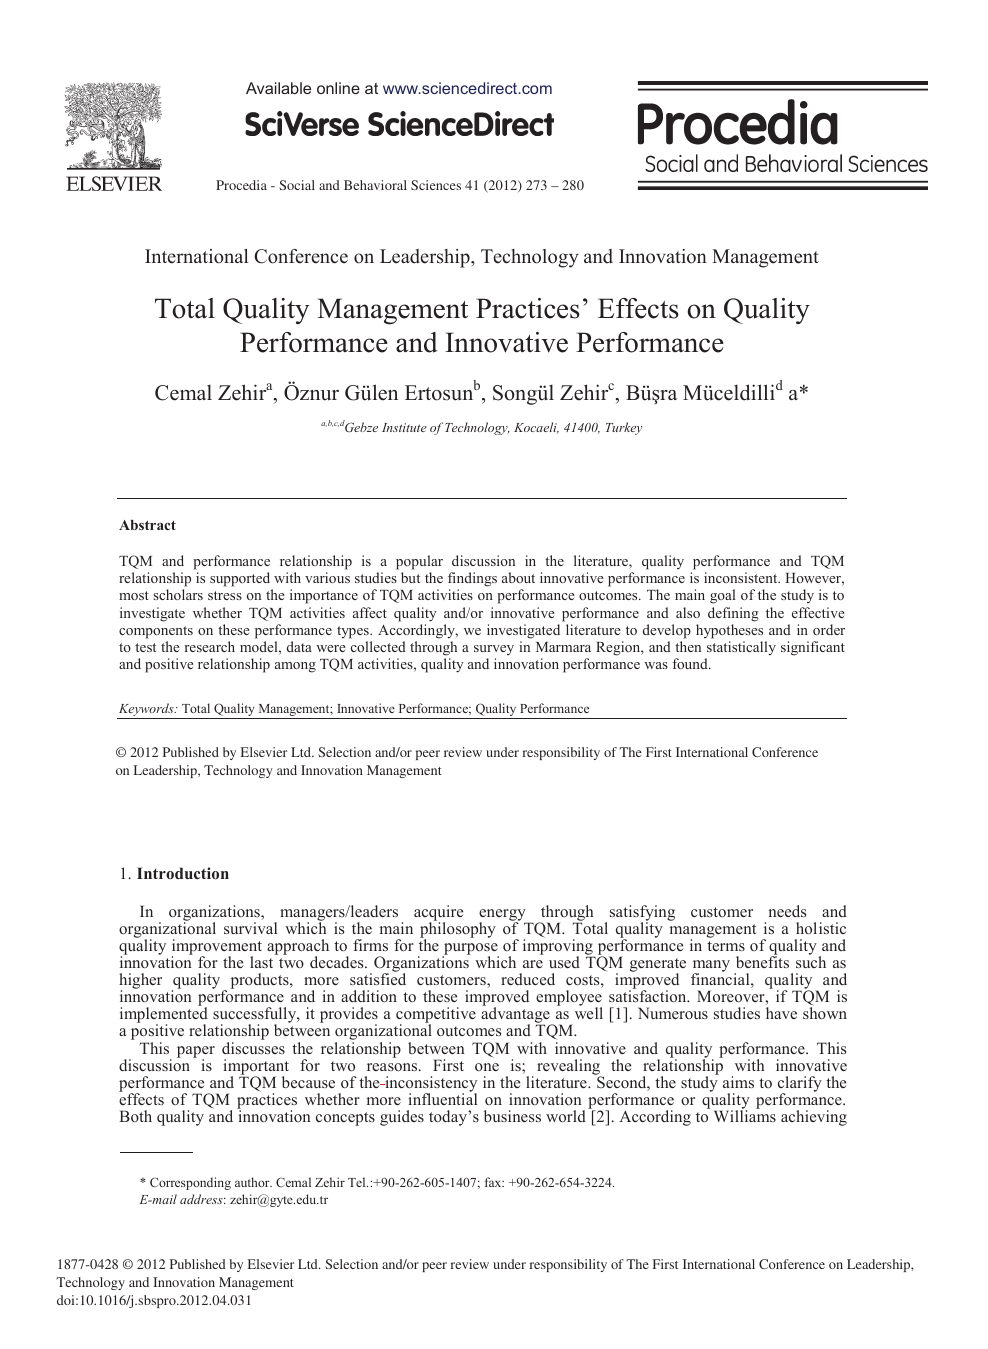 article review on total quality management